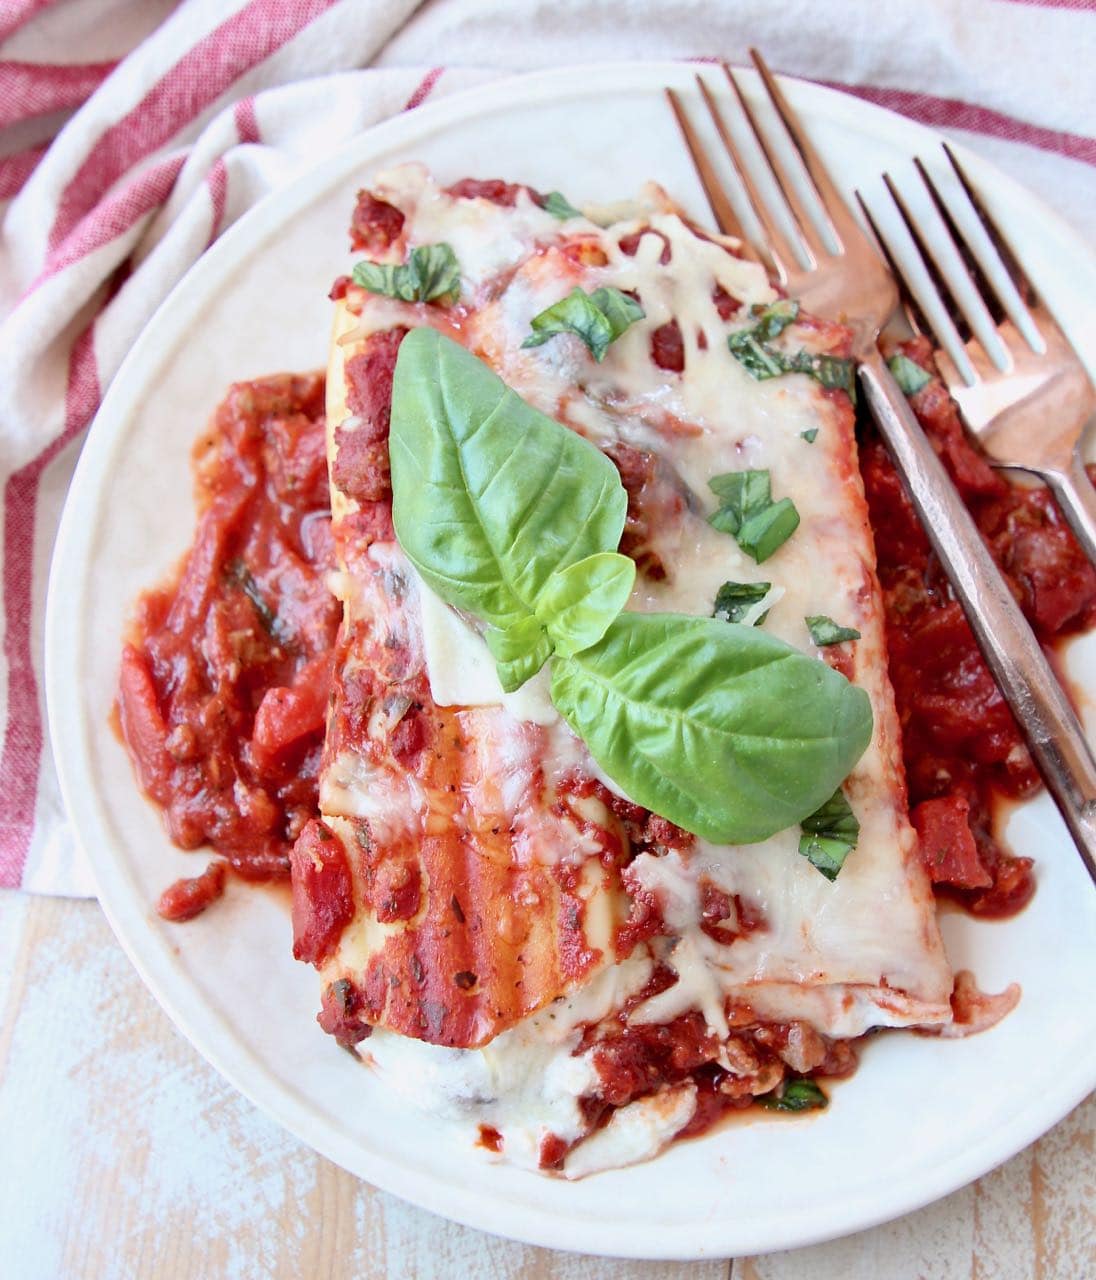 Manicotti on plate with fresh basil leaves and copper forks